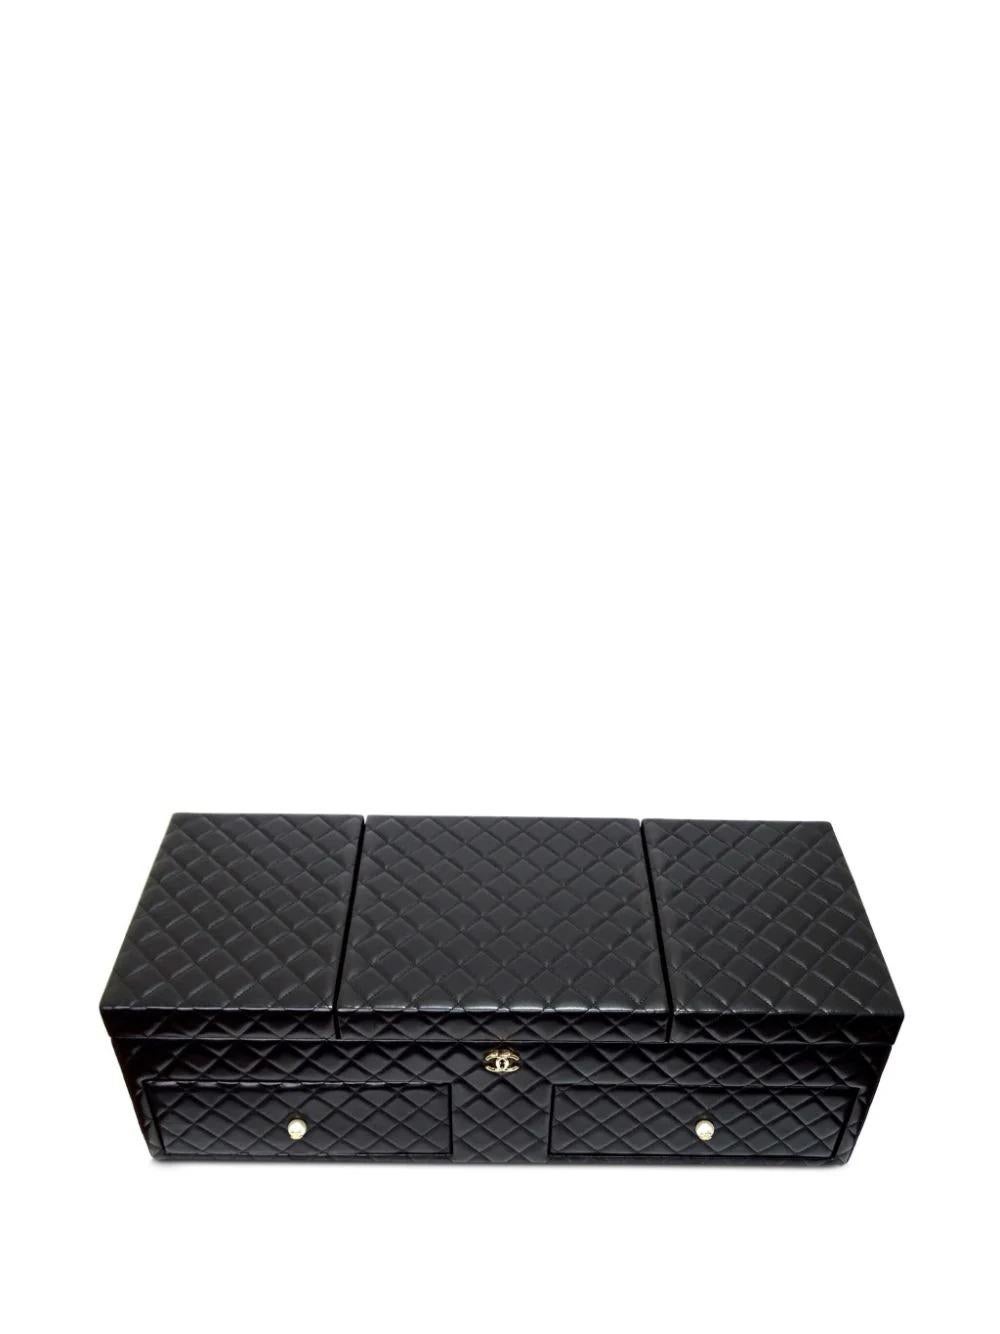 Chanel 2010 Diamond Quilted Lambskin Giant Jewelry Decor Case For Sale 2